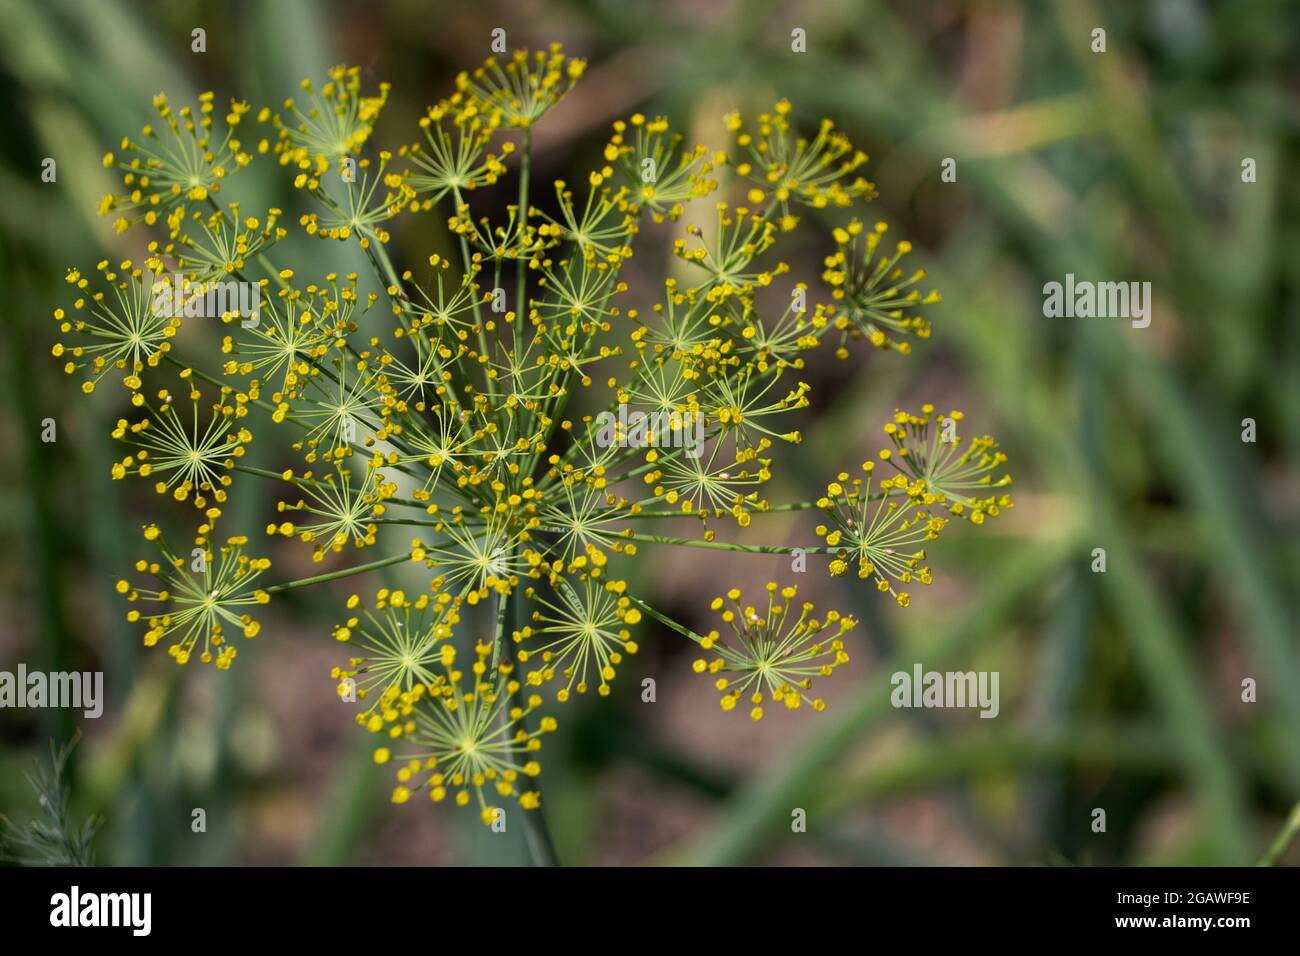 Dill (Anethum graveolens) is an annual herb in the celery family Apiaceae. It is the only species in the genus Anethum. Dill flowers, close-up. Stock Photo